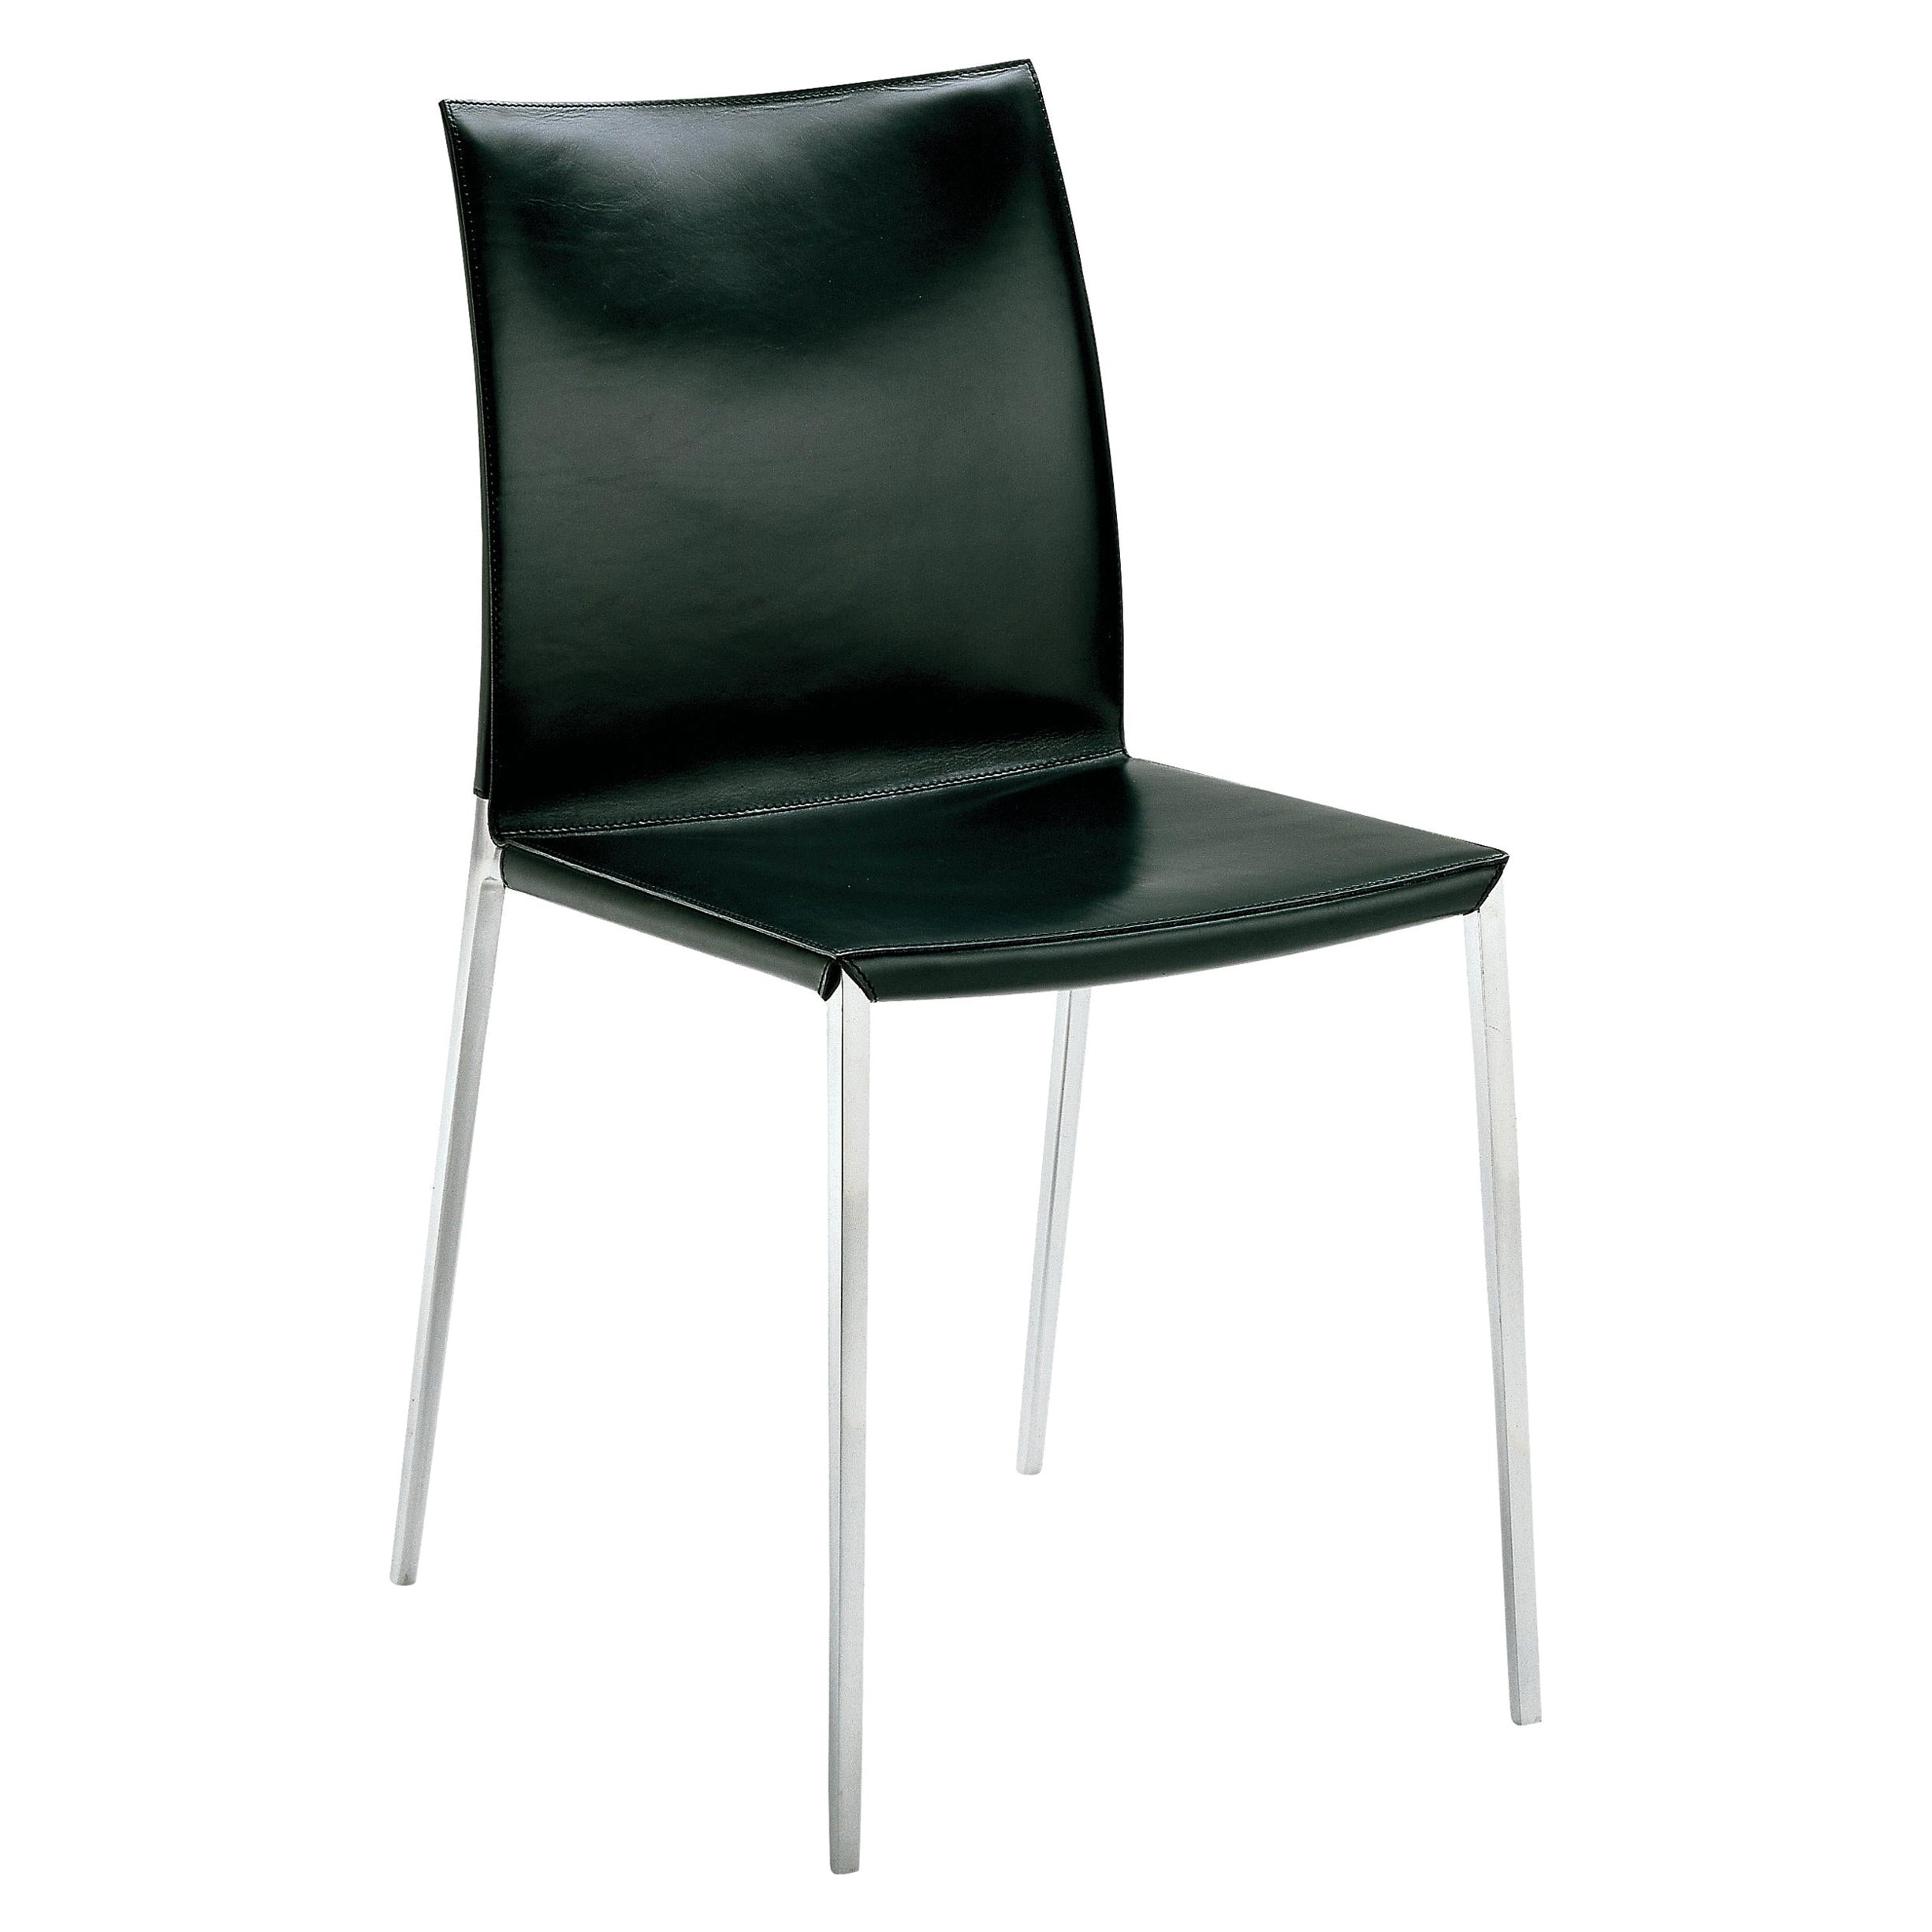 Zanotta Lia Chair in Black Upholstery with Polished Aluminum Frame For Sale